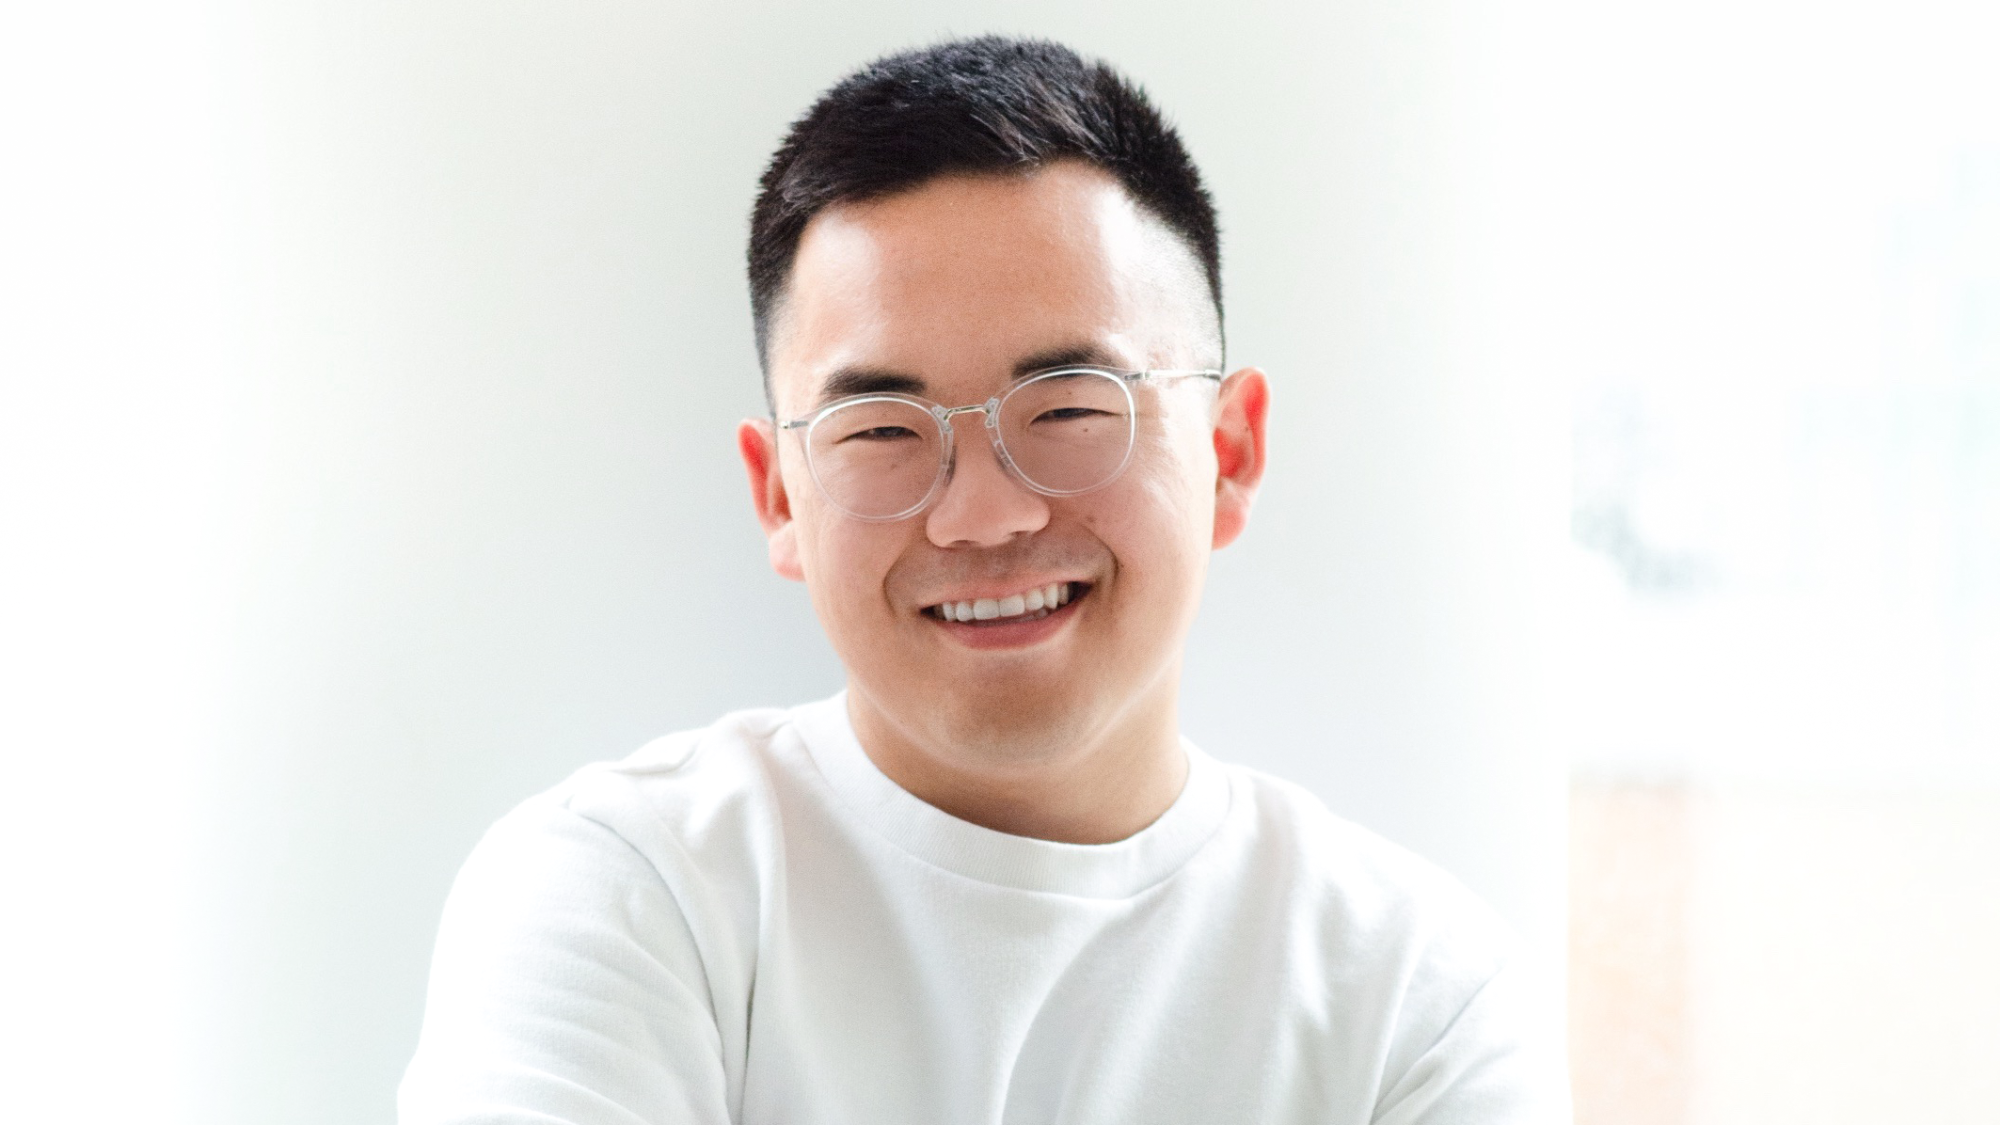 A young man with glasses and short, black hair smiles widely at the camera with folded arms.